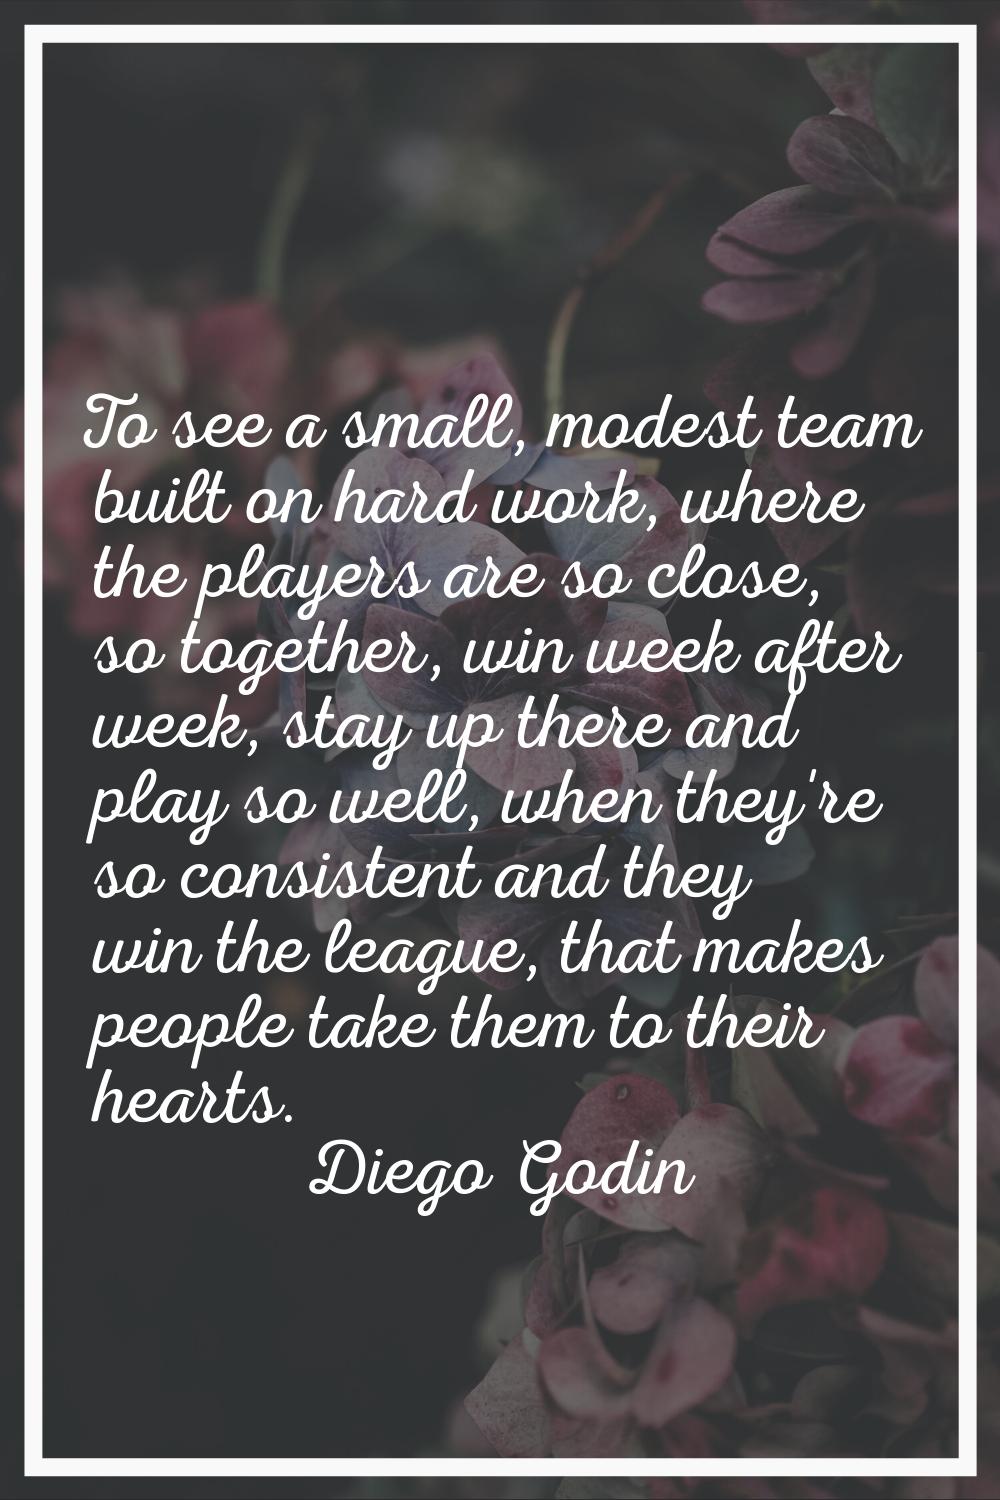 To see a small, modest team built on hard work, where the players are so close, so together, win we